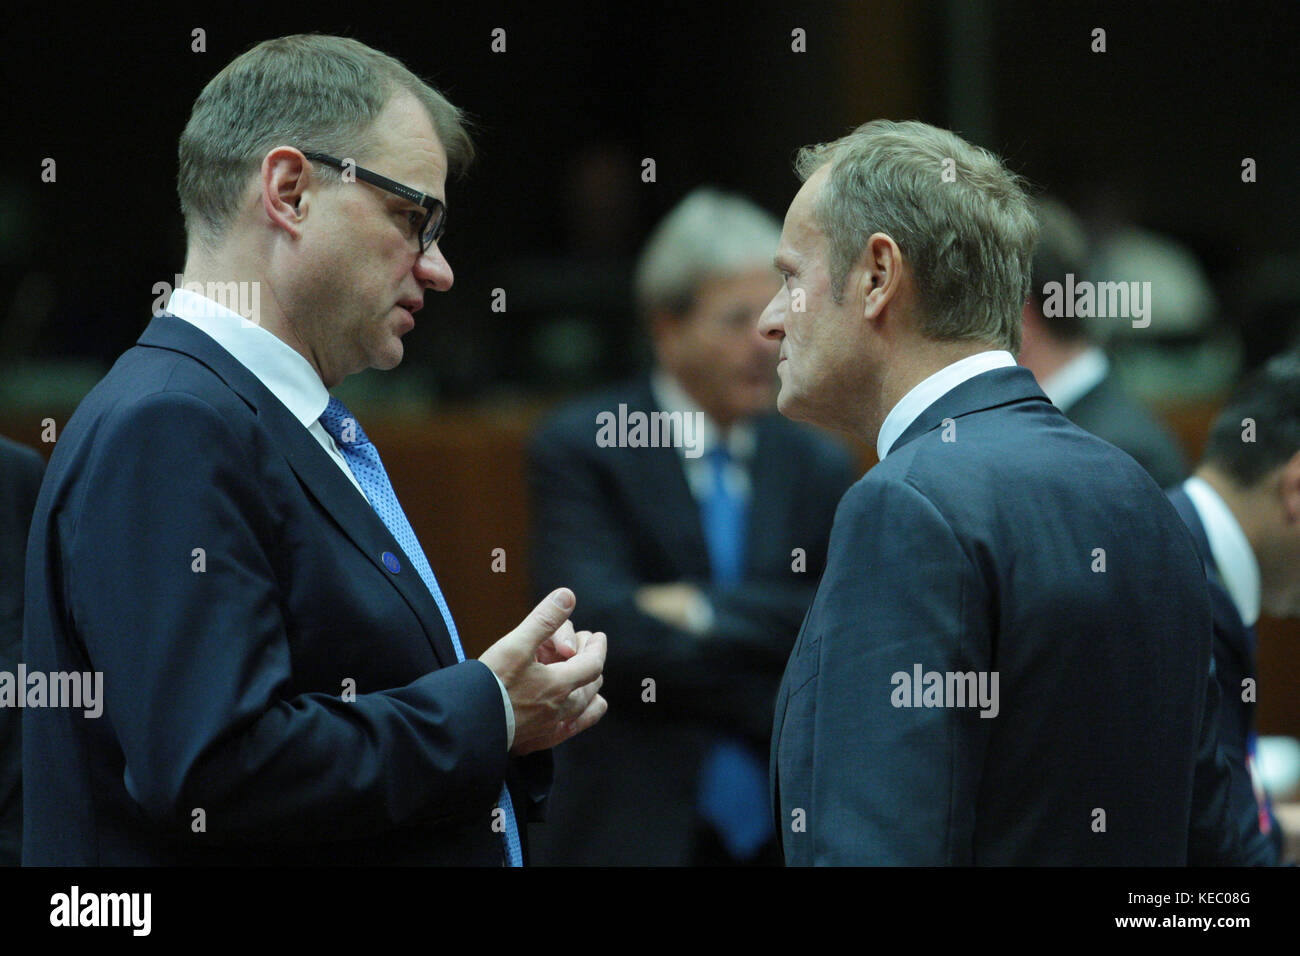 Brussels, Belgium. 19th Oct, 2017. Juha Sipila Primer Minister of Finland and Donald Tusk President of European Council, at the European Council, during tehe round table. Credit: Leo Cavallo/Alamy Live News Stock Photo